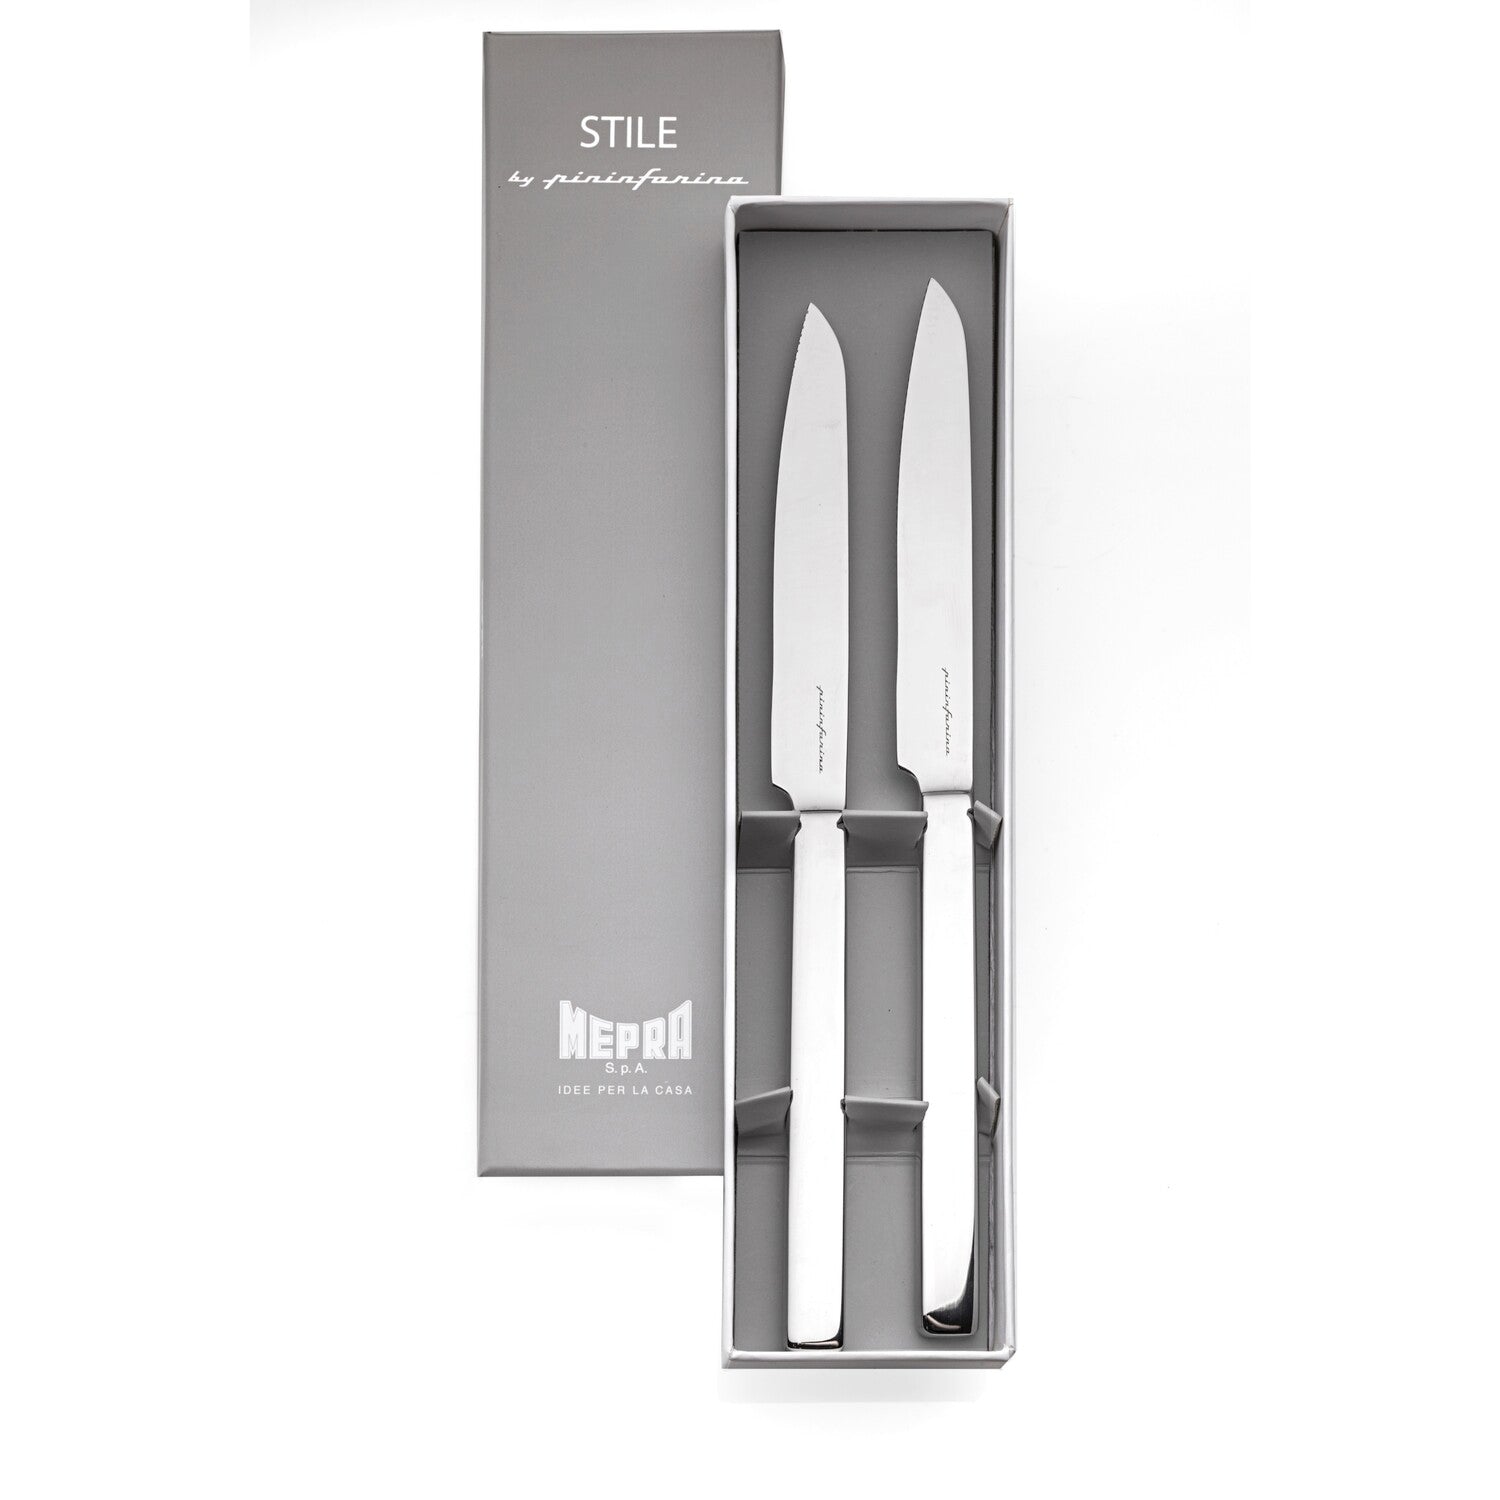 Mepra Knife Set, 2 Pieces -Stainless Steel